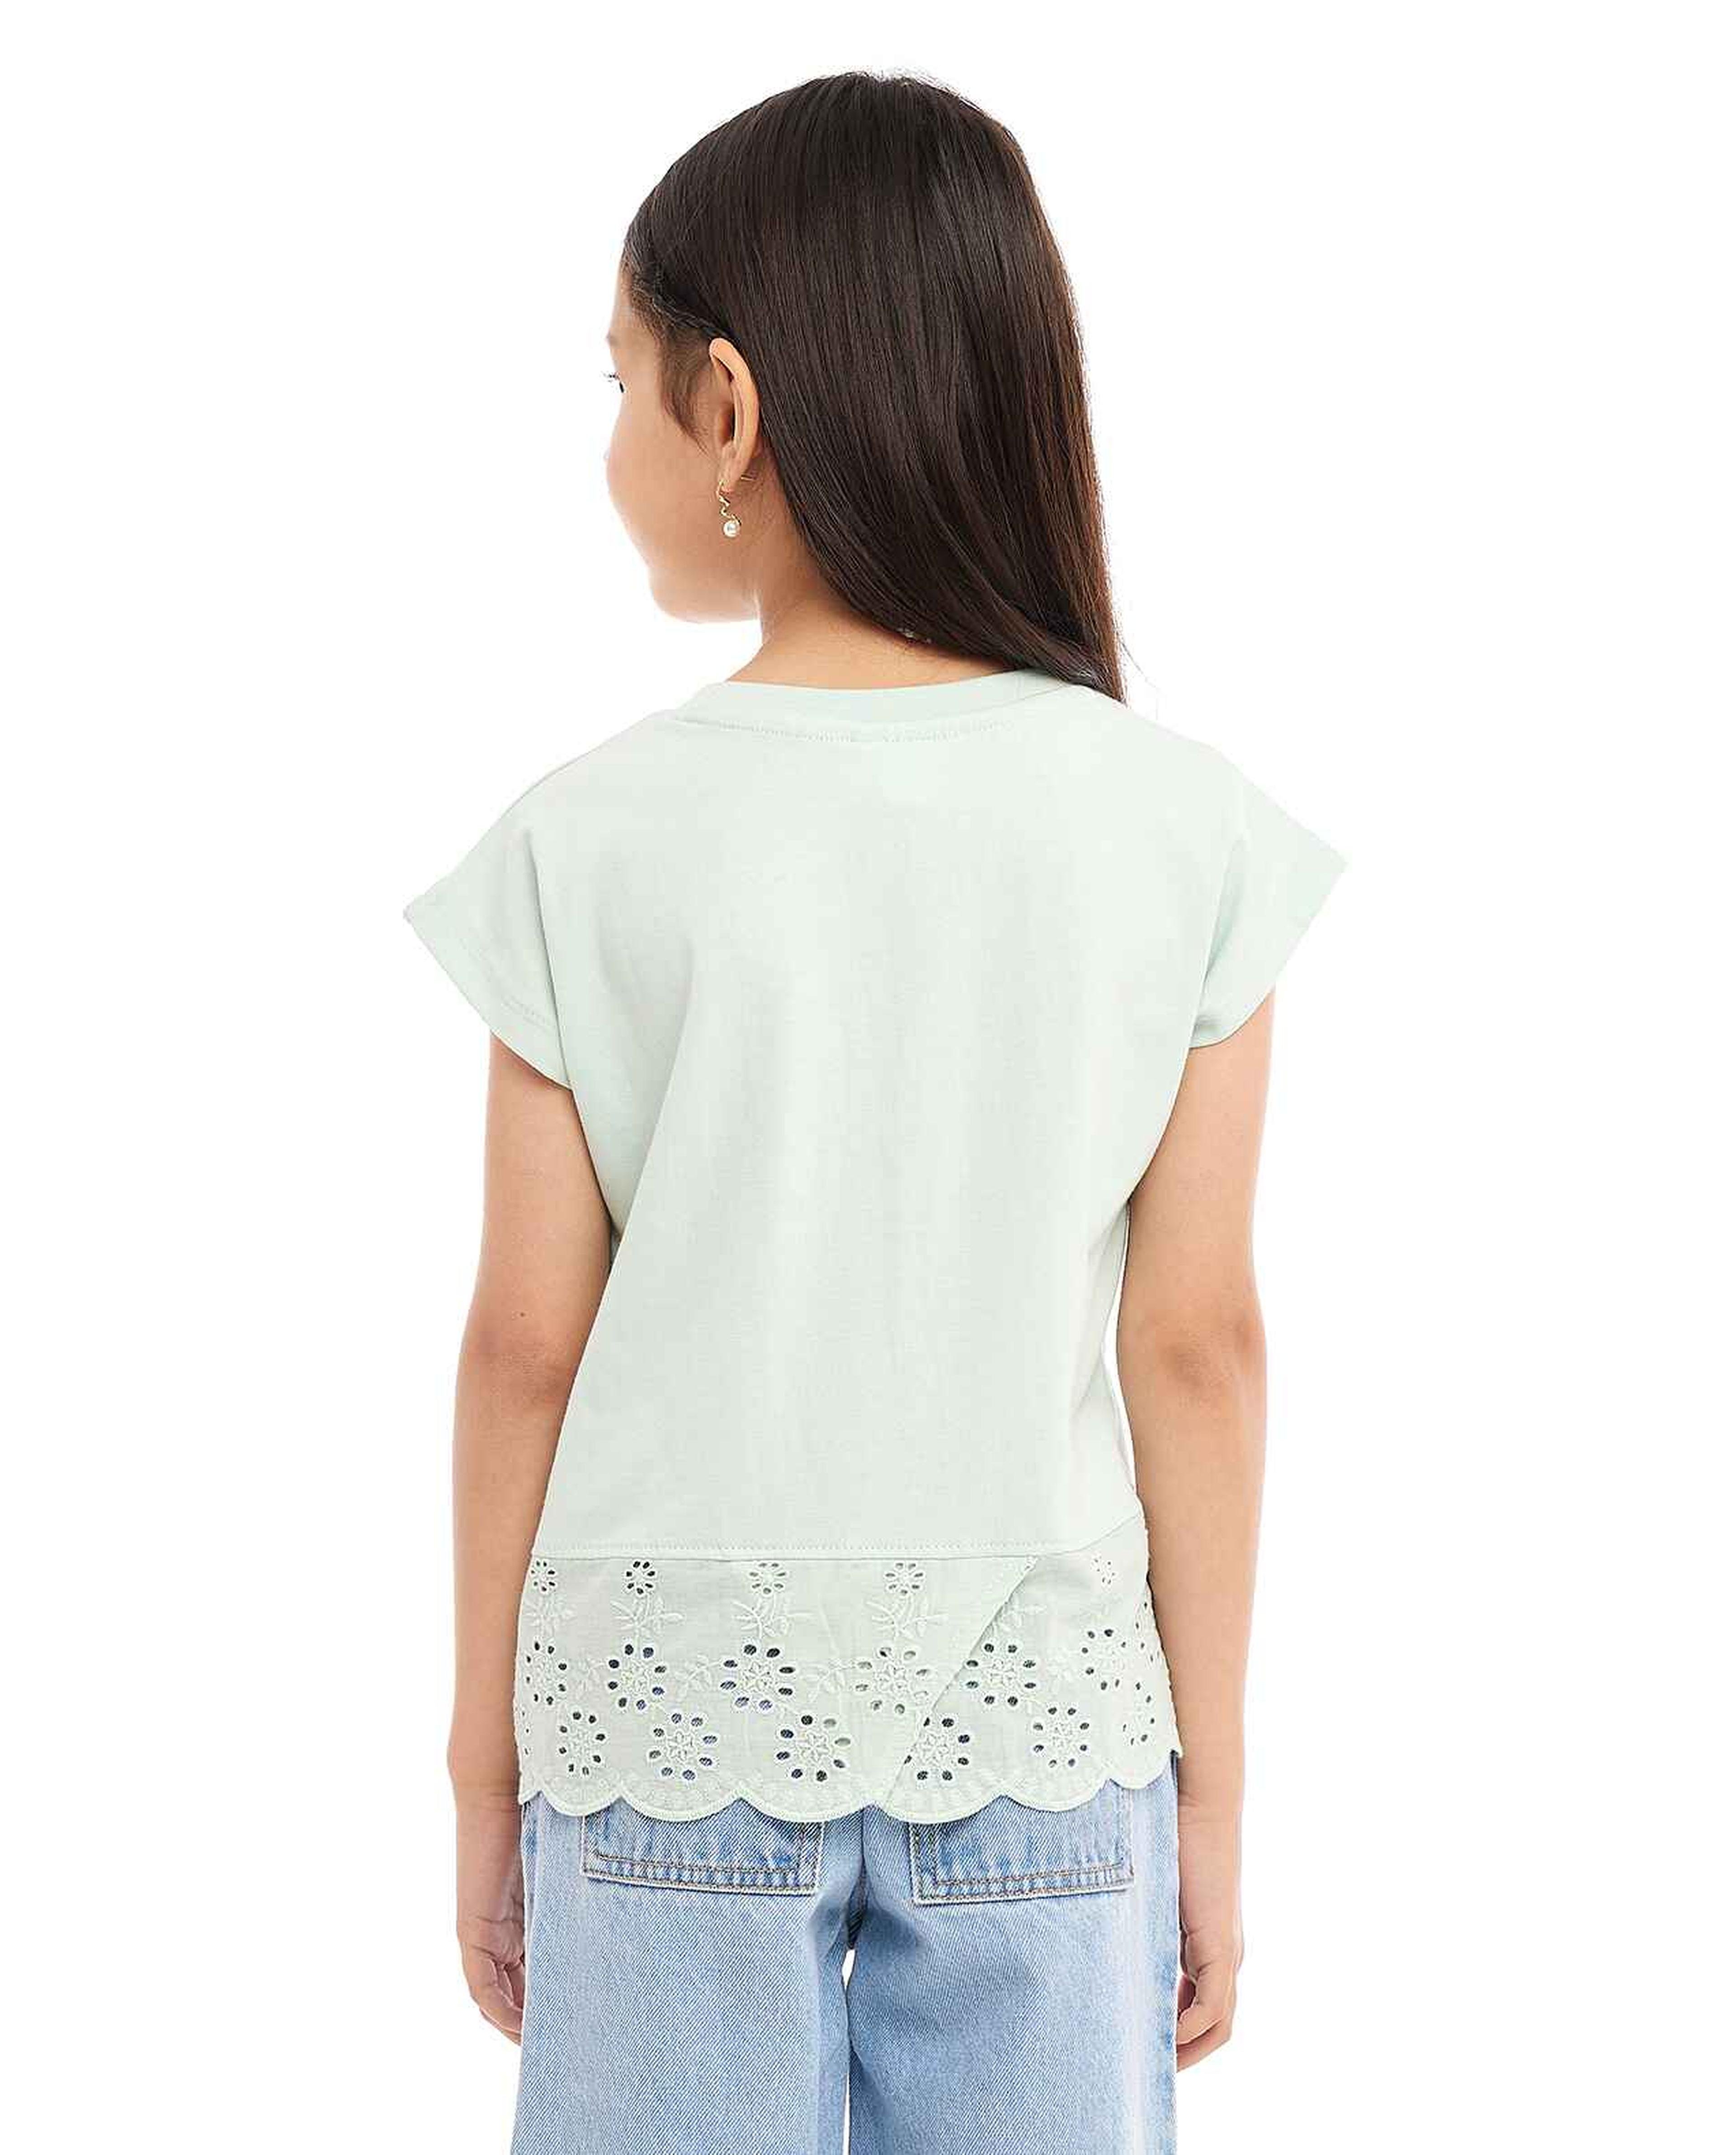 Minnie & Daisy Print T-Shirt with Crew Neck and Short Sleeves